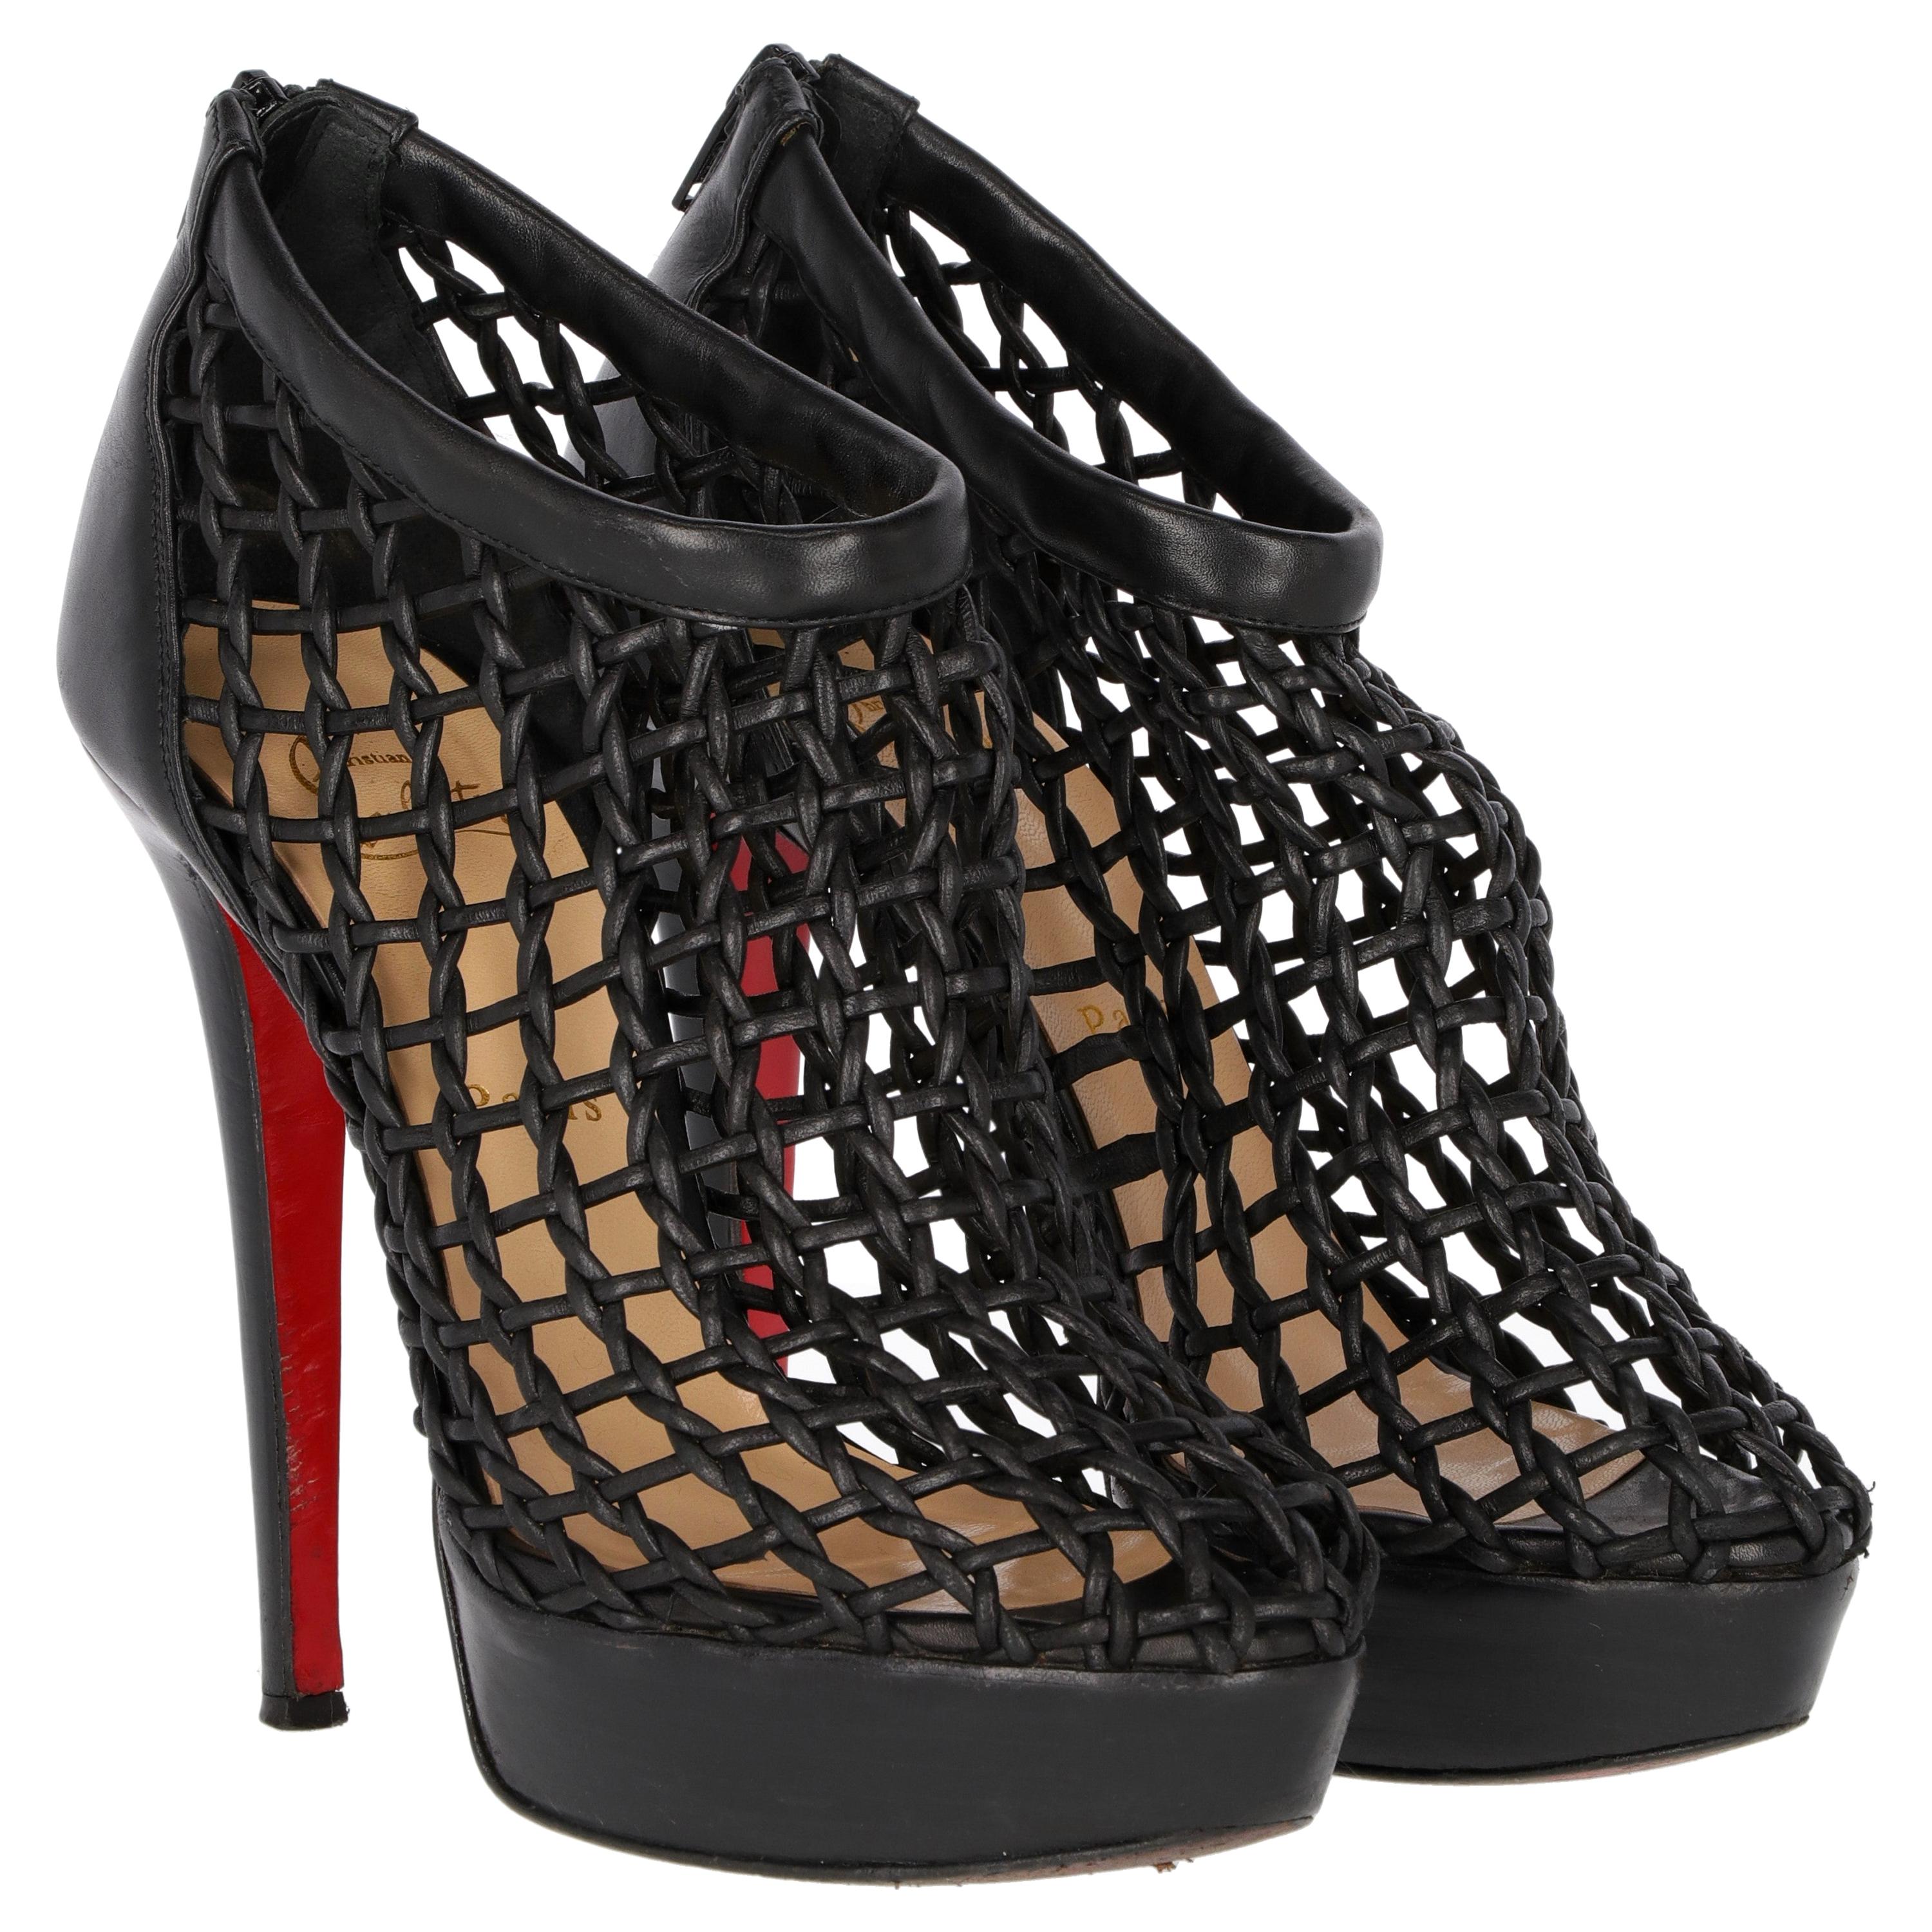 2010s Christian Louboutin Leather Pumps